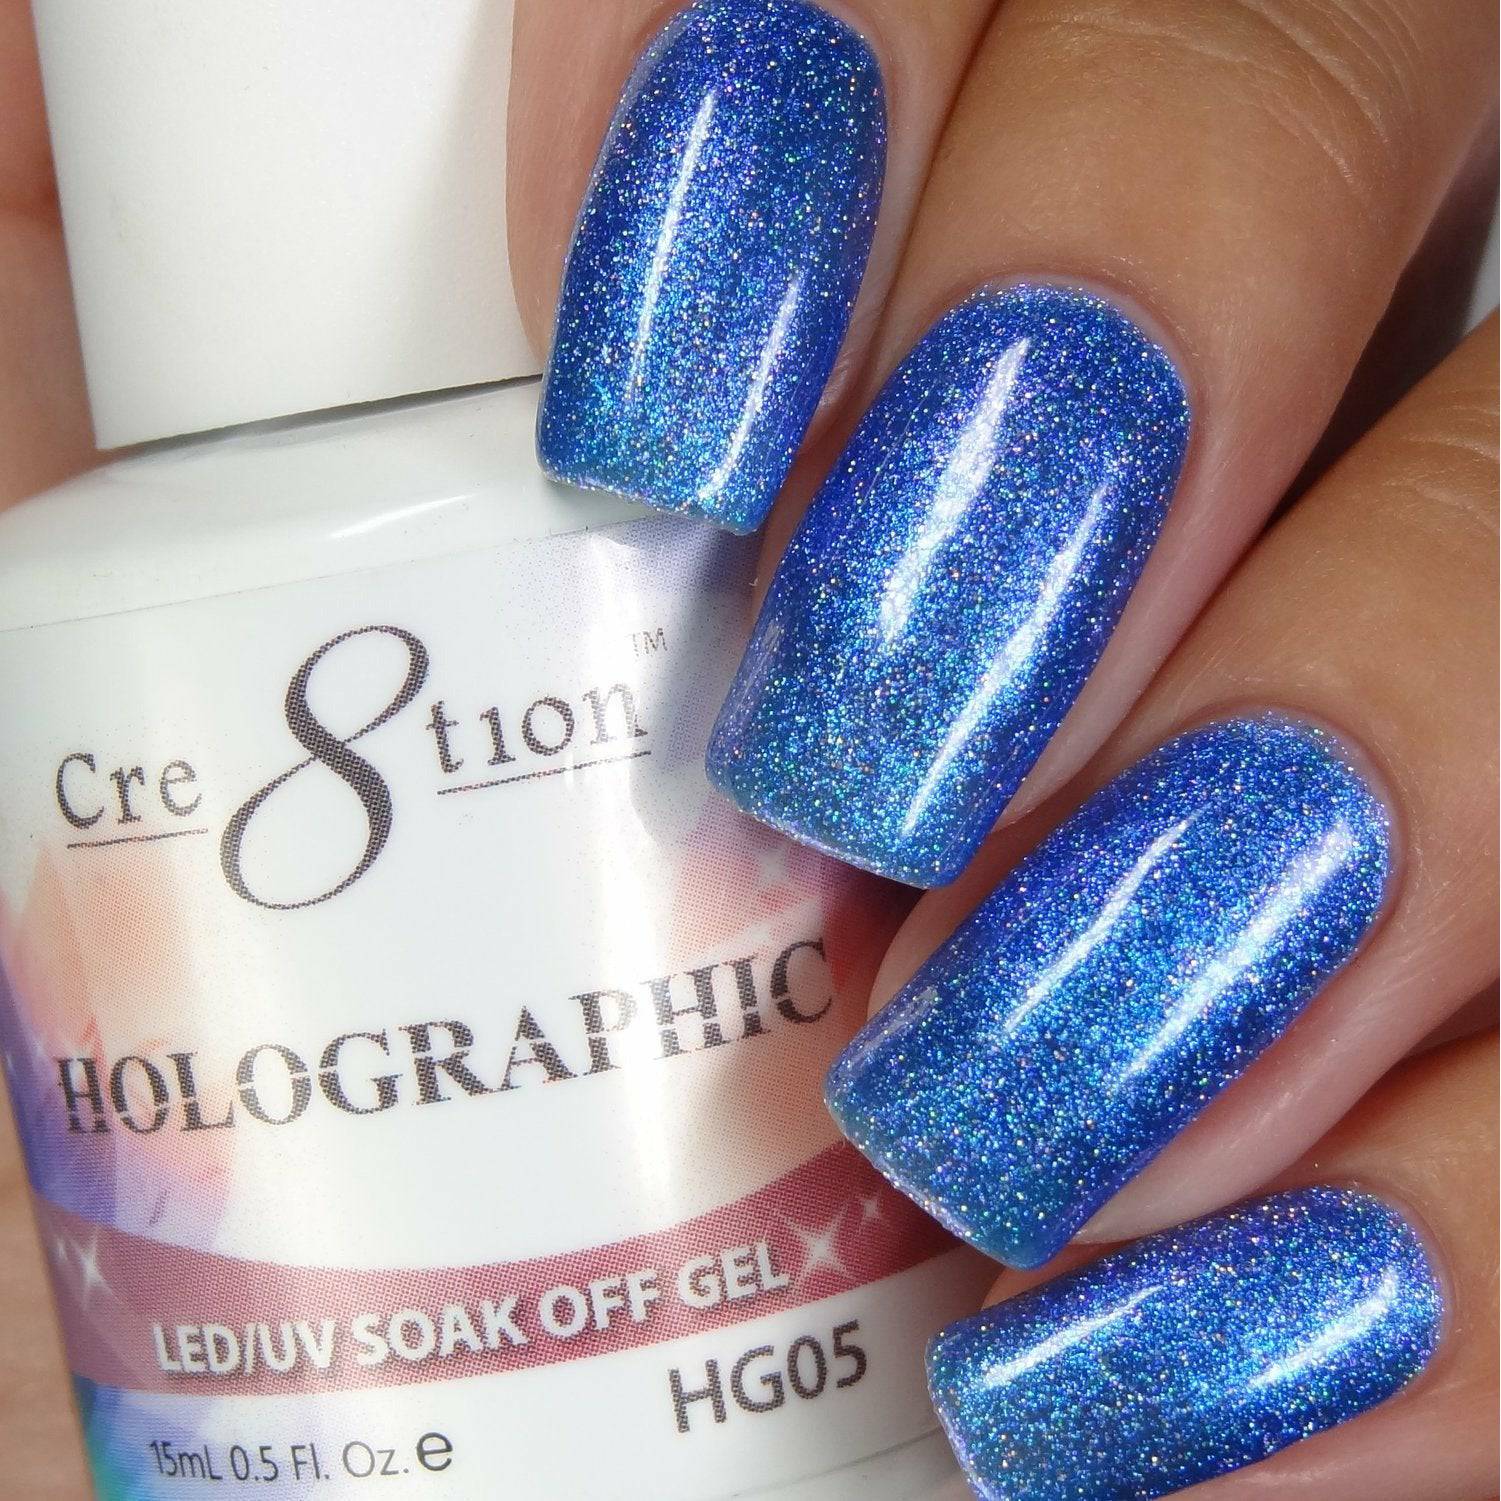 Cre8tion Holographic Gel - HG05 - Universal Nail Supplies